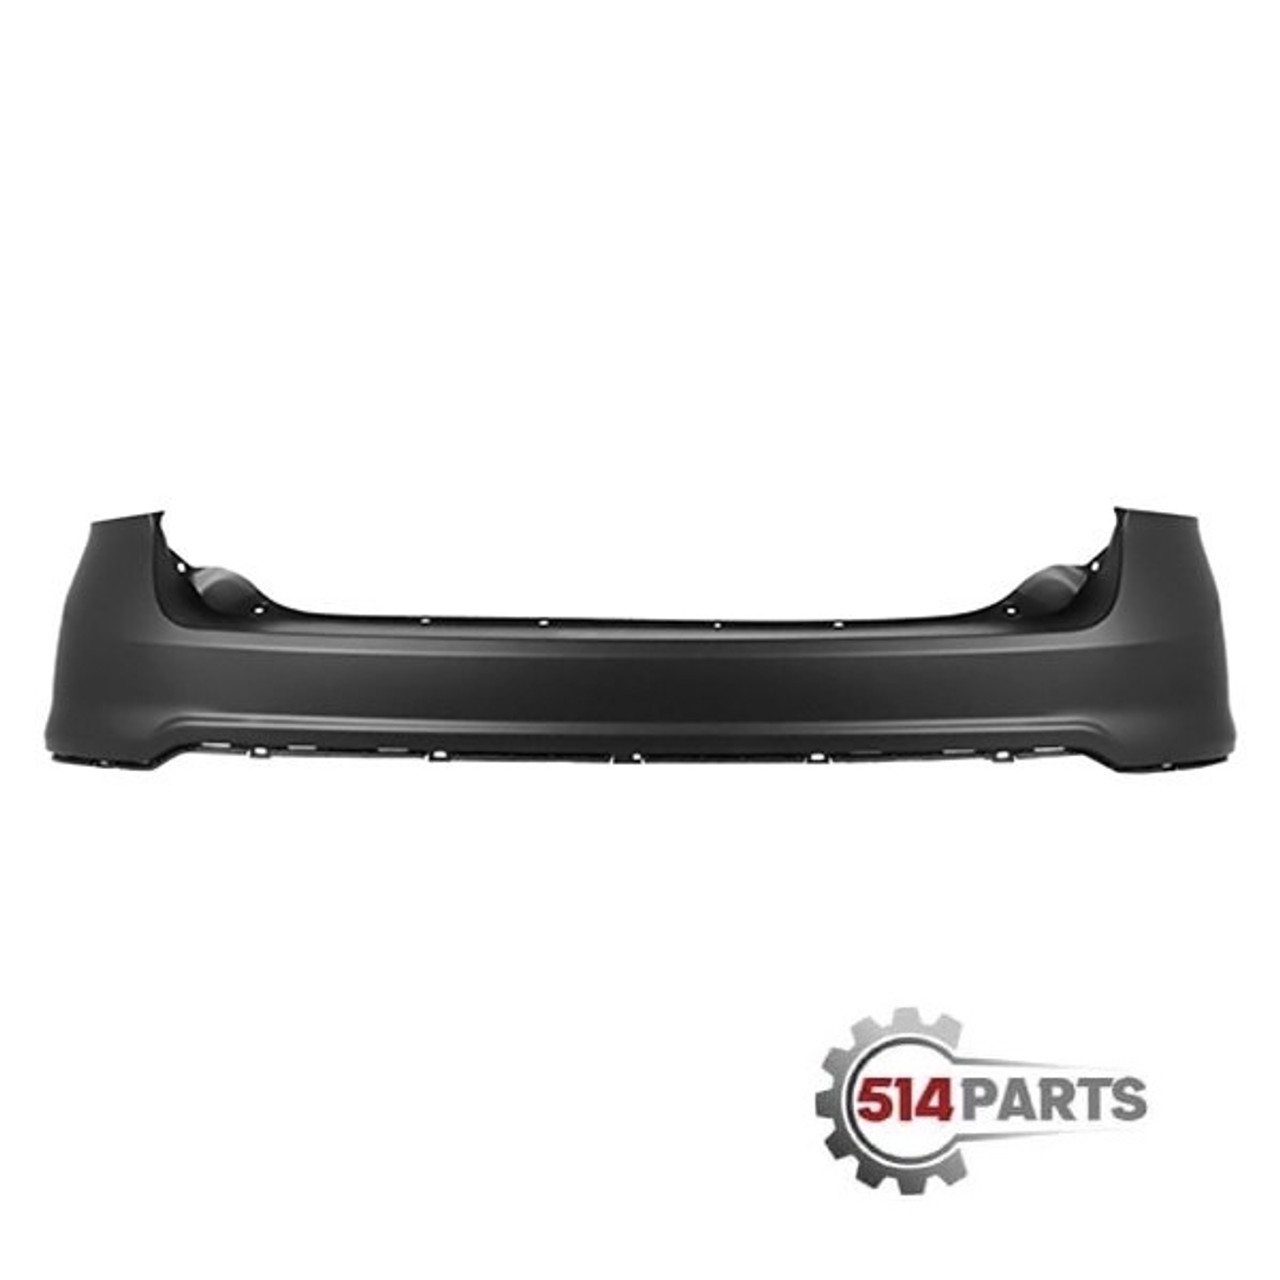 2011 - 2014 FORD EDGE REAR BUMPER COVER - PARE-CHOCS ARRIERE